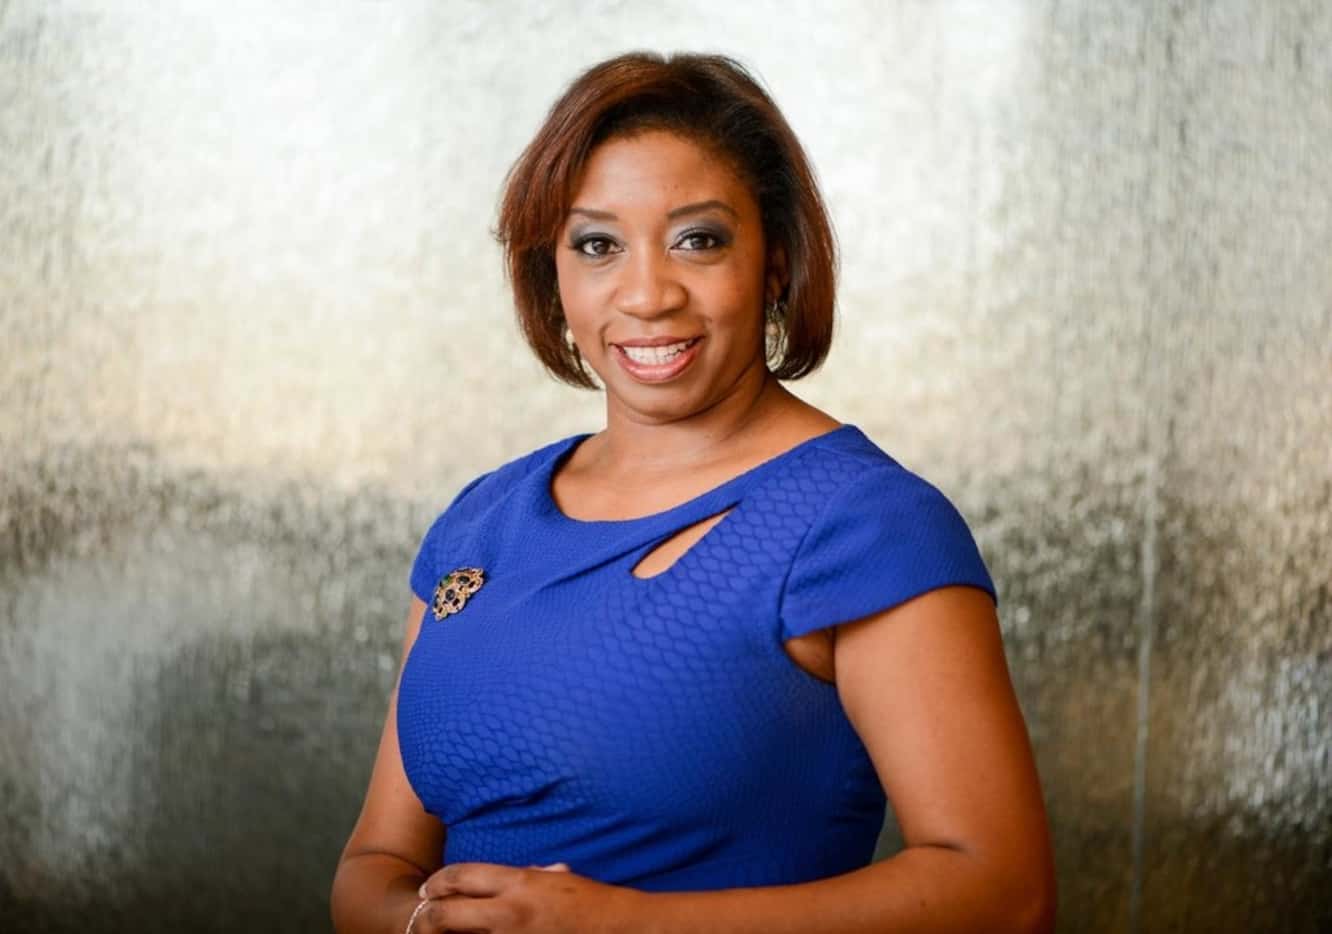 Dallas Women s Foundation named A. Shonn Brown its chair elect.